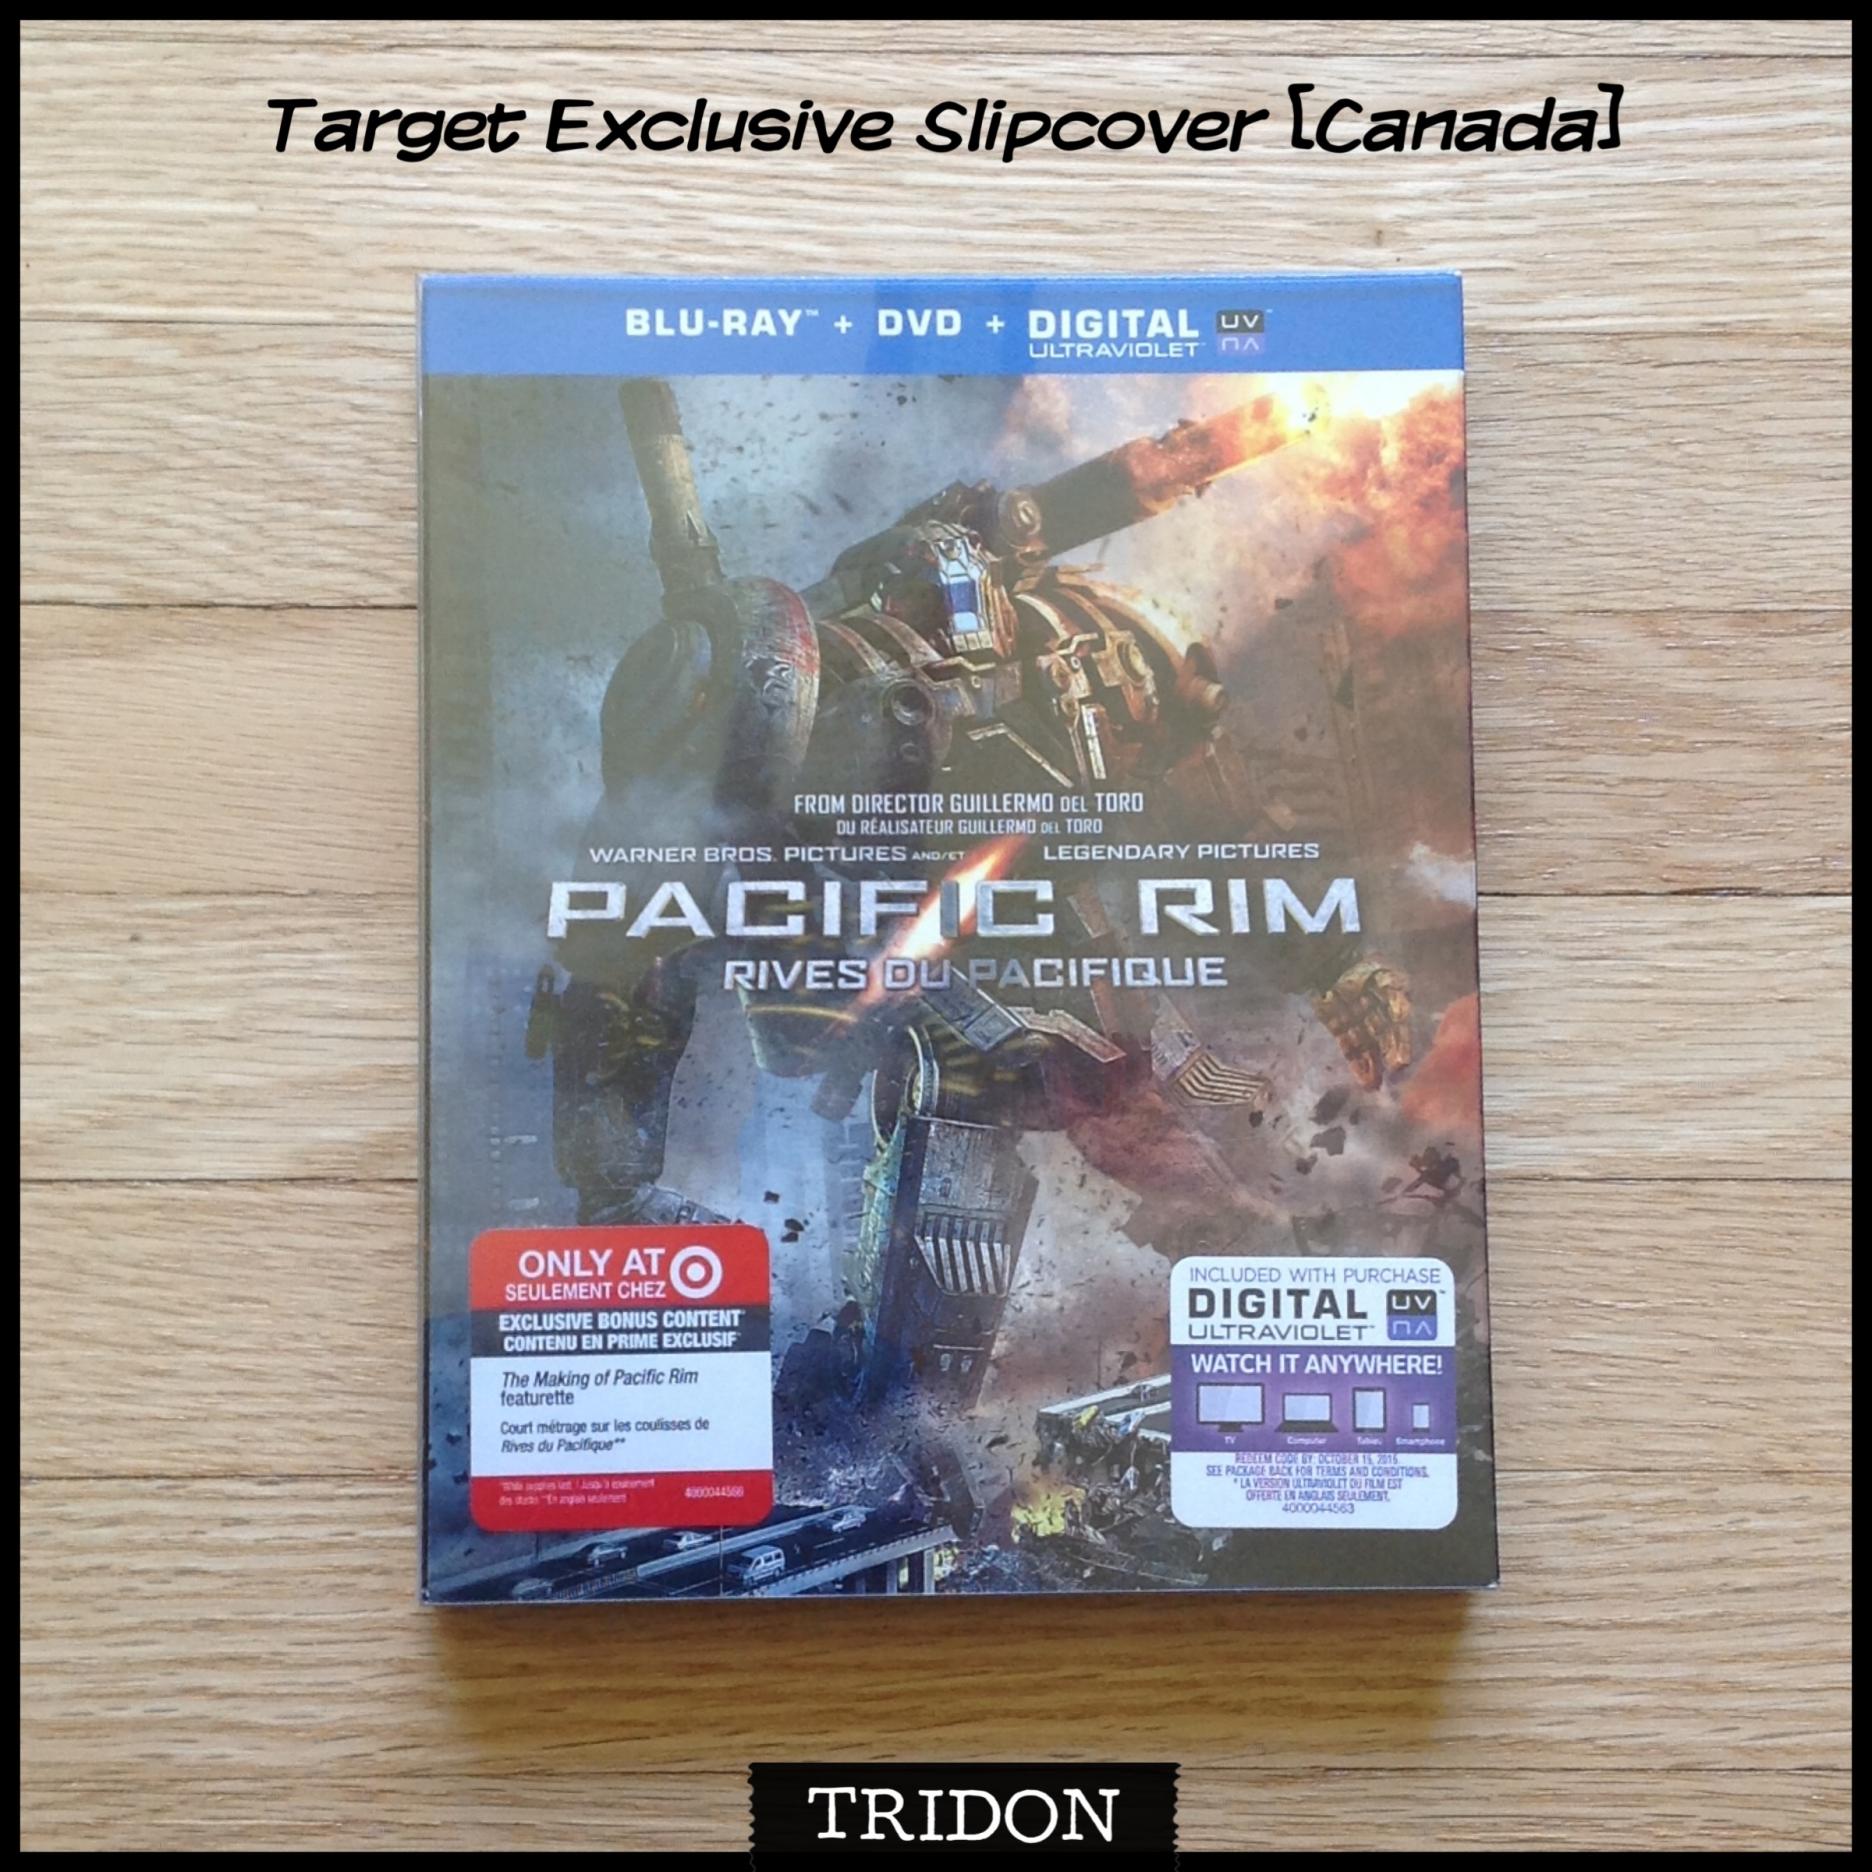 Target Exclusive Blu-ray with Slipcover and Bonus Disc [Canada].